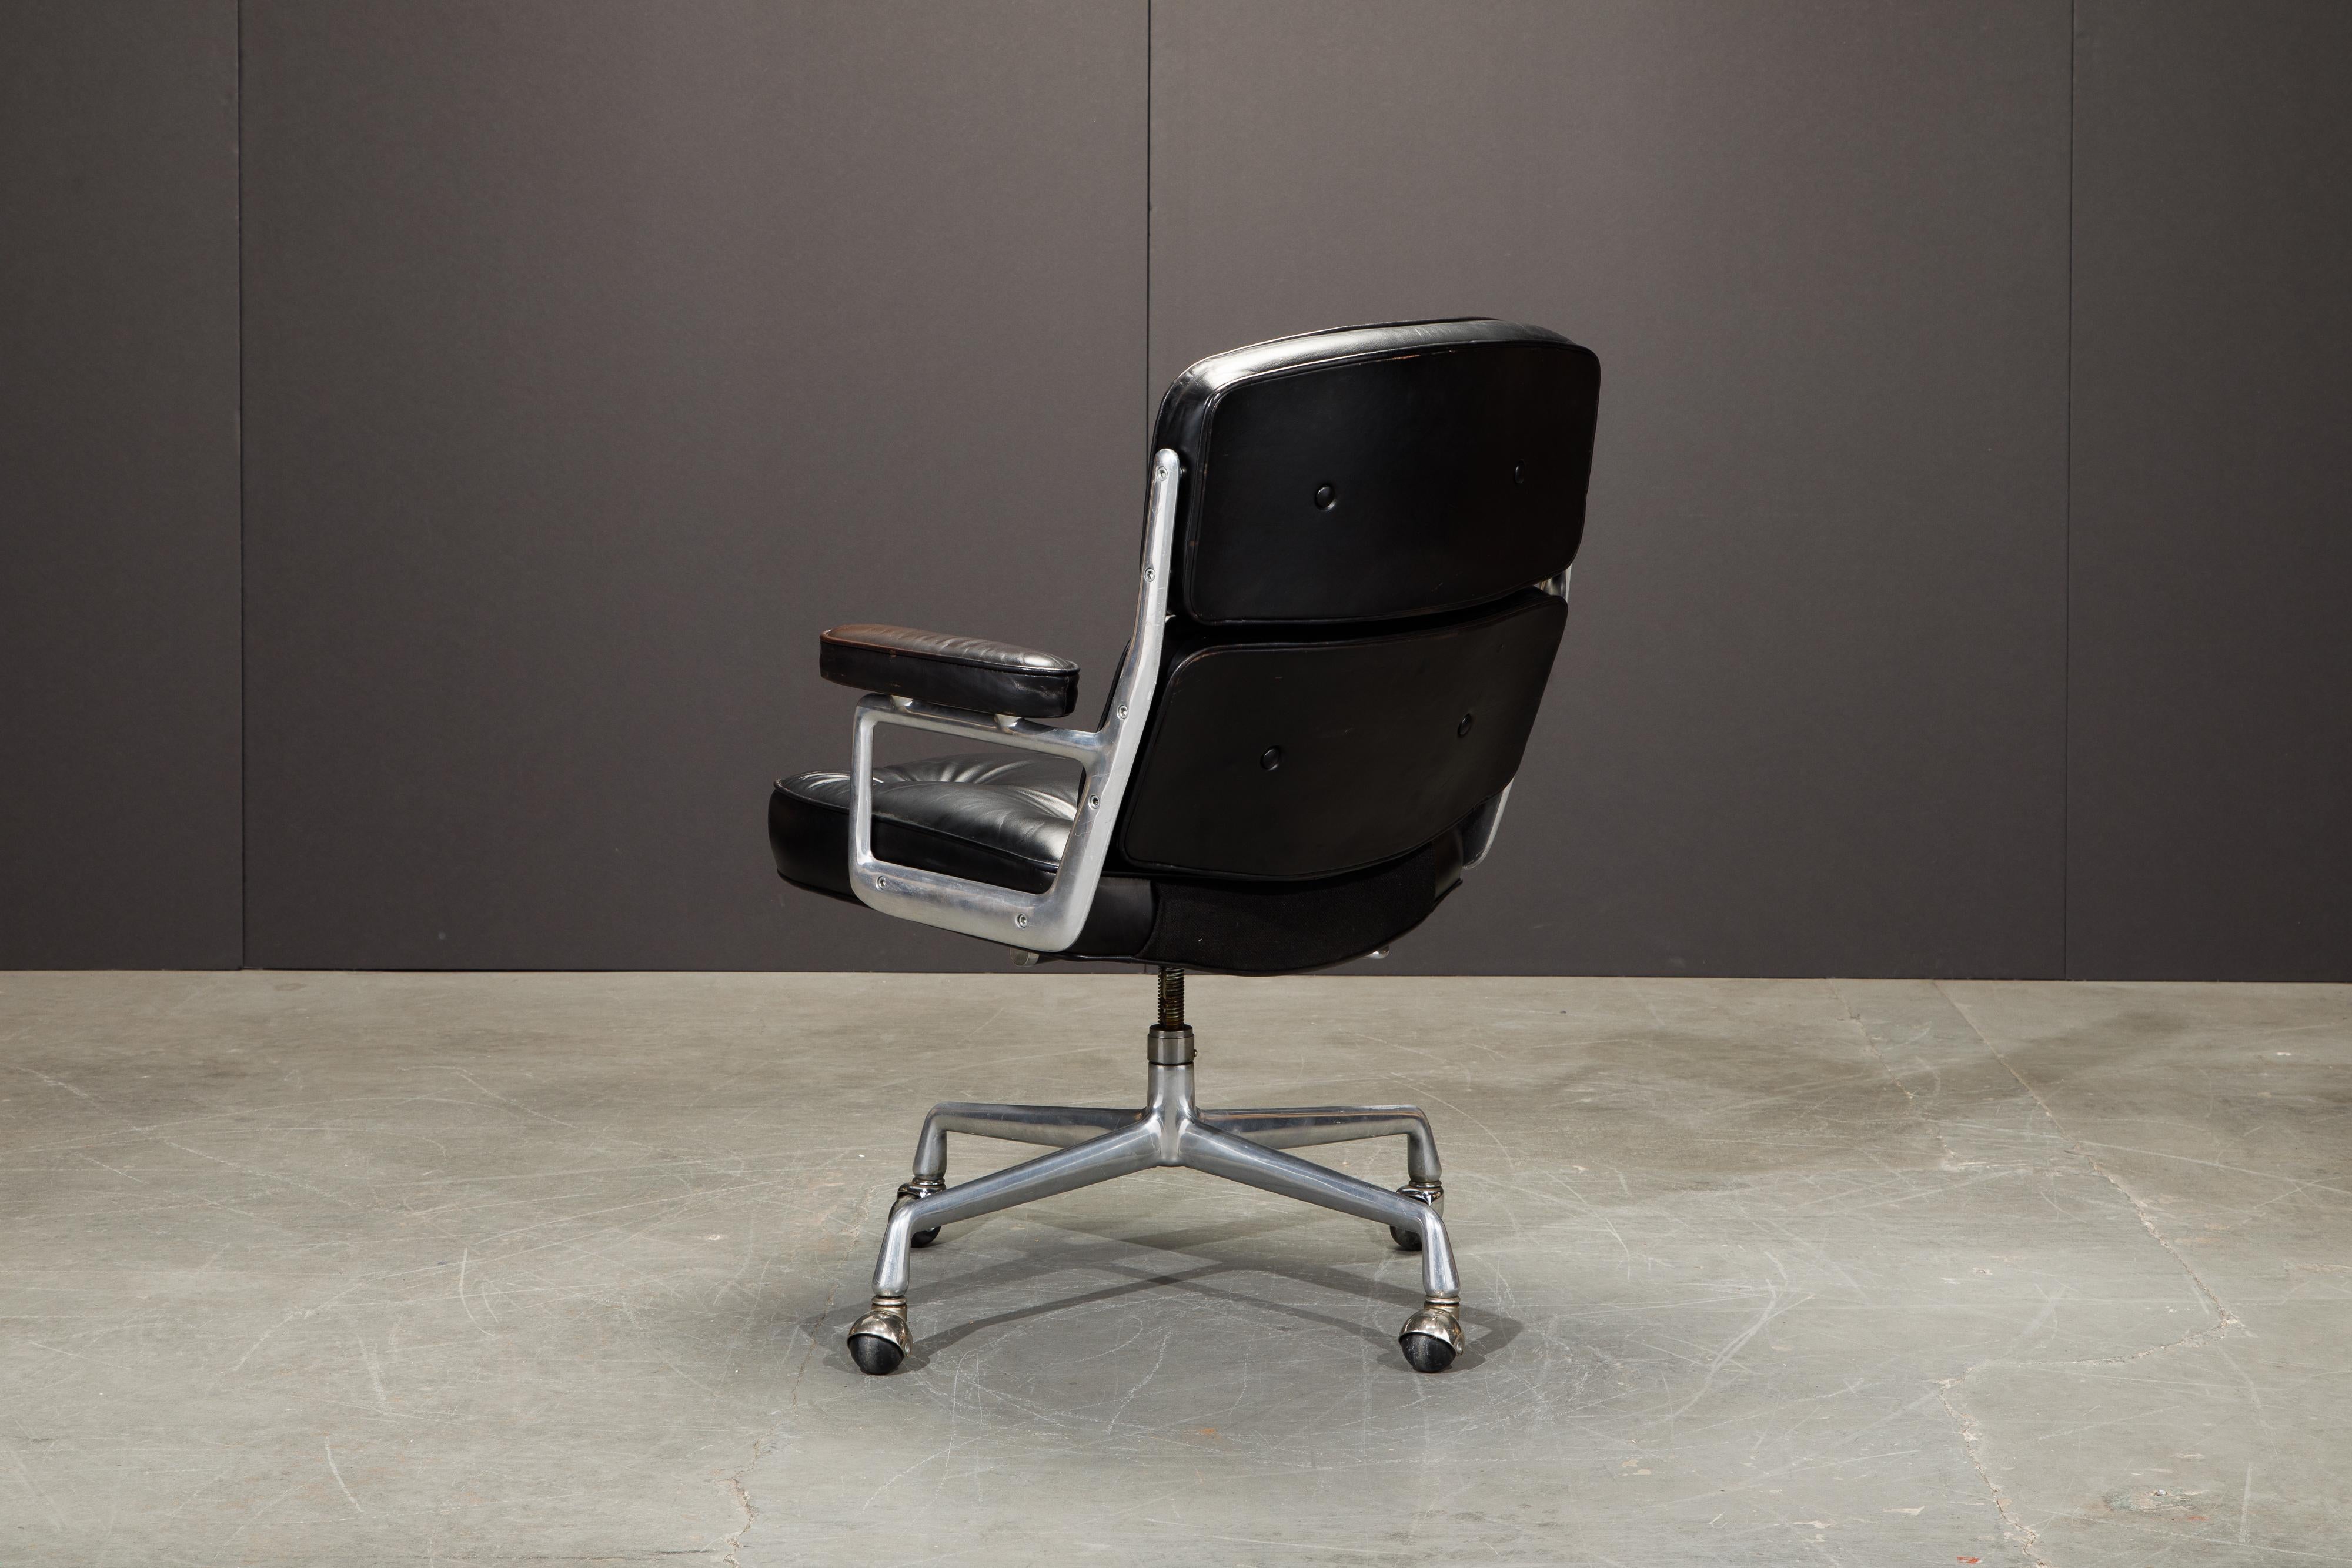 Aluminum Time Life Executive Desk Chair by Charles Eames for Herman Miller, 1980, Signed